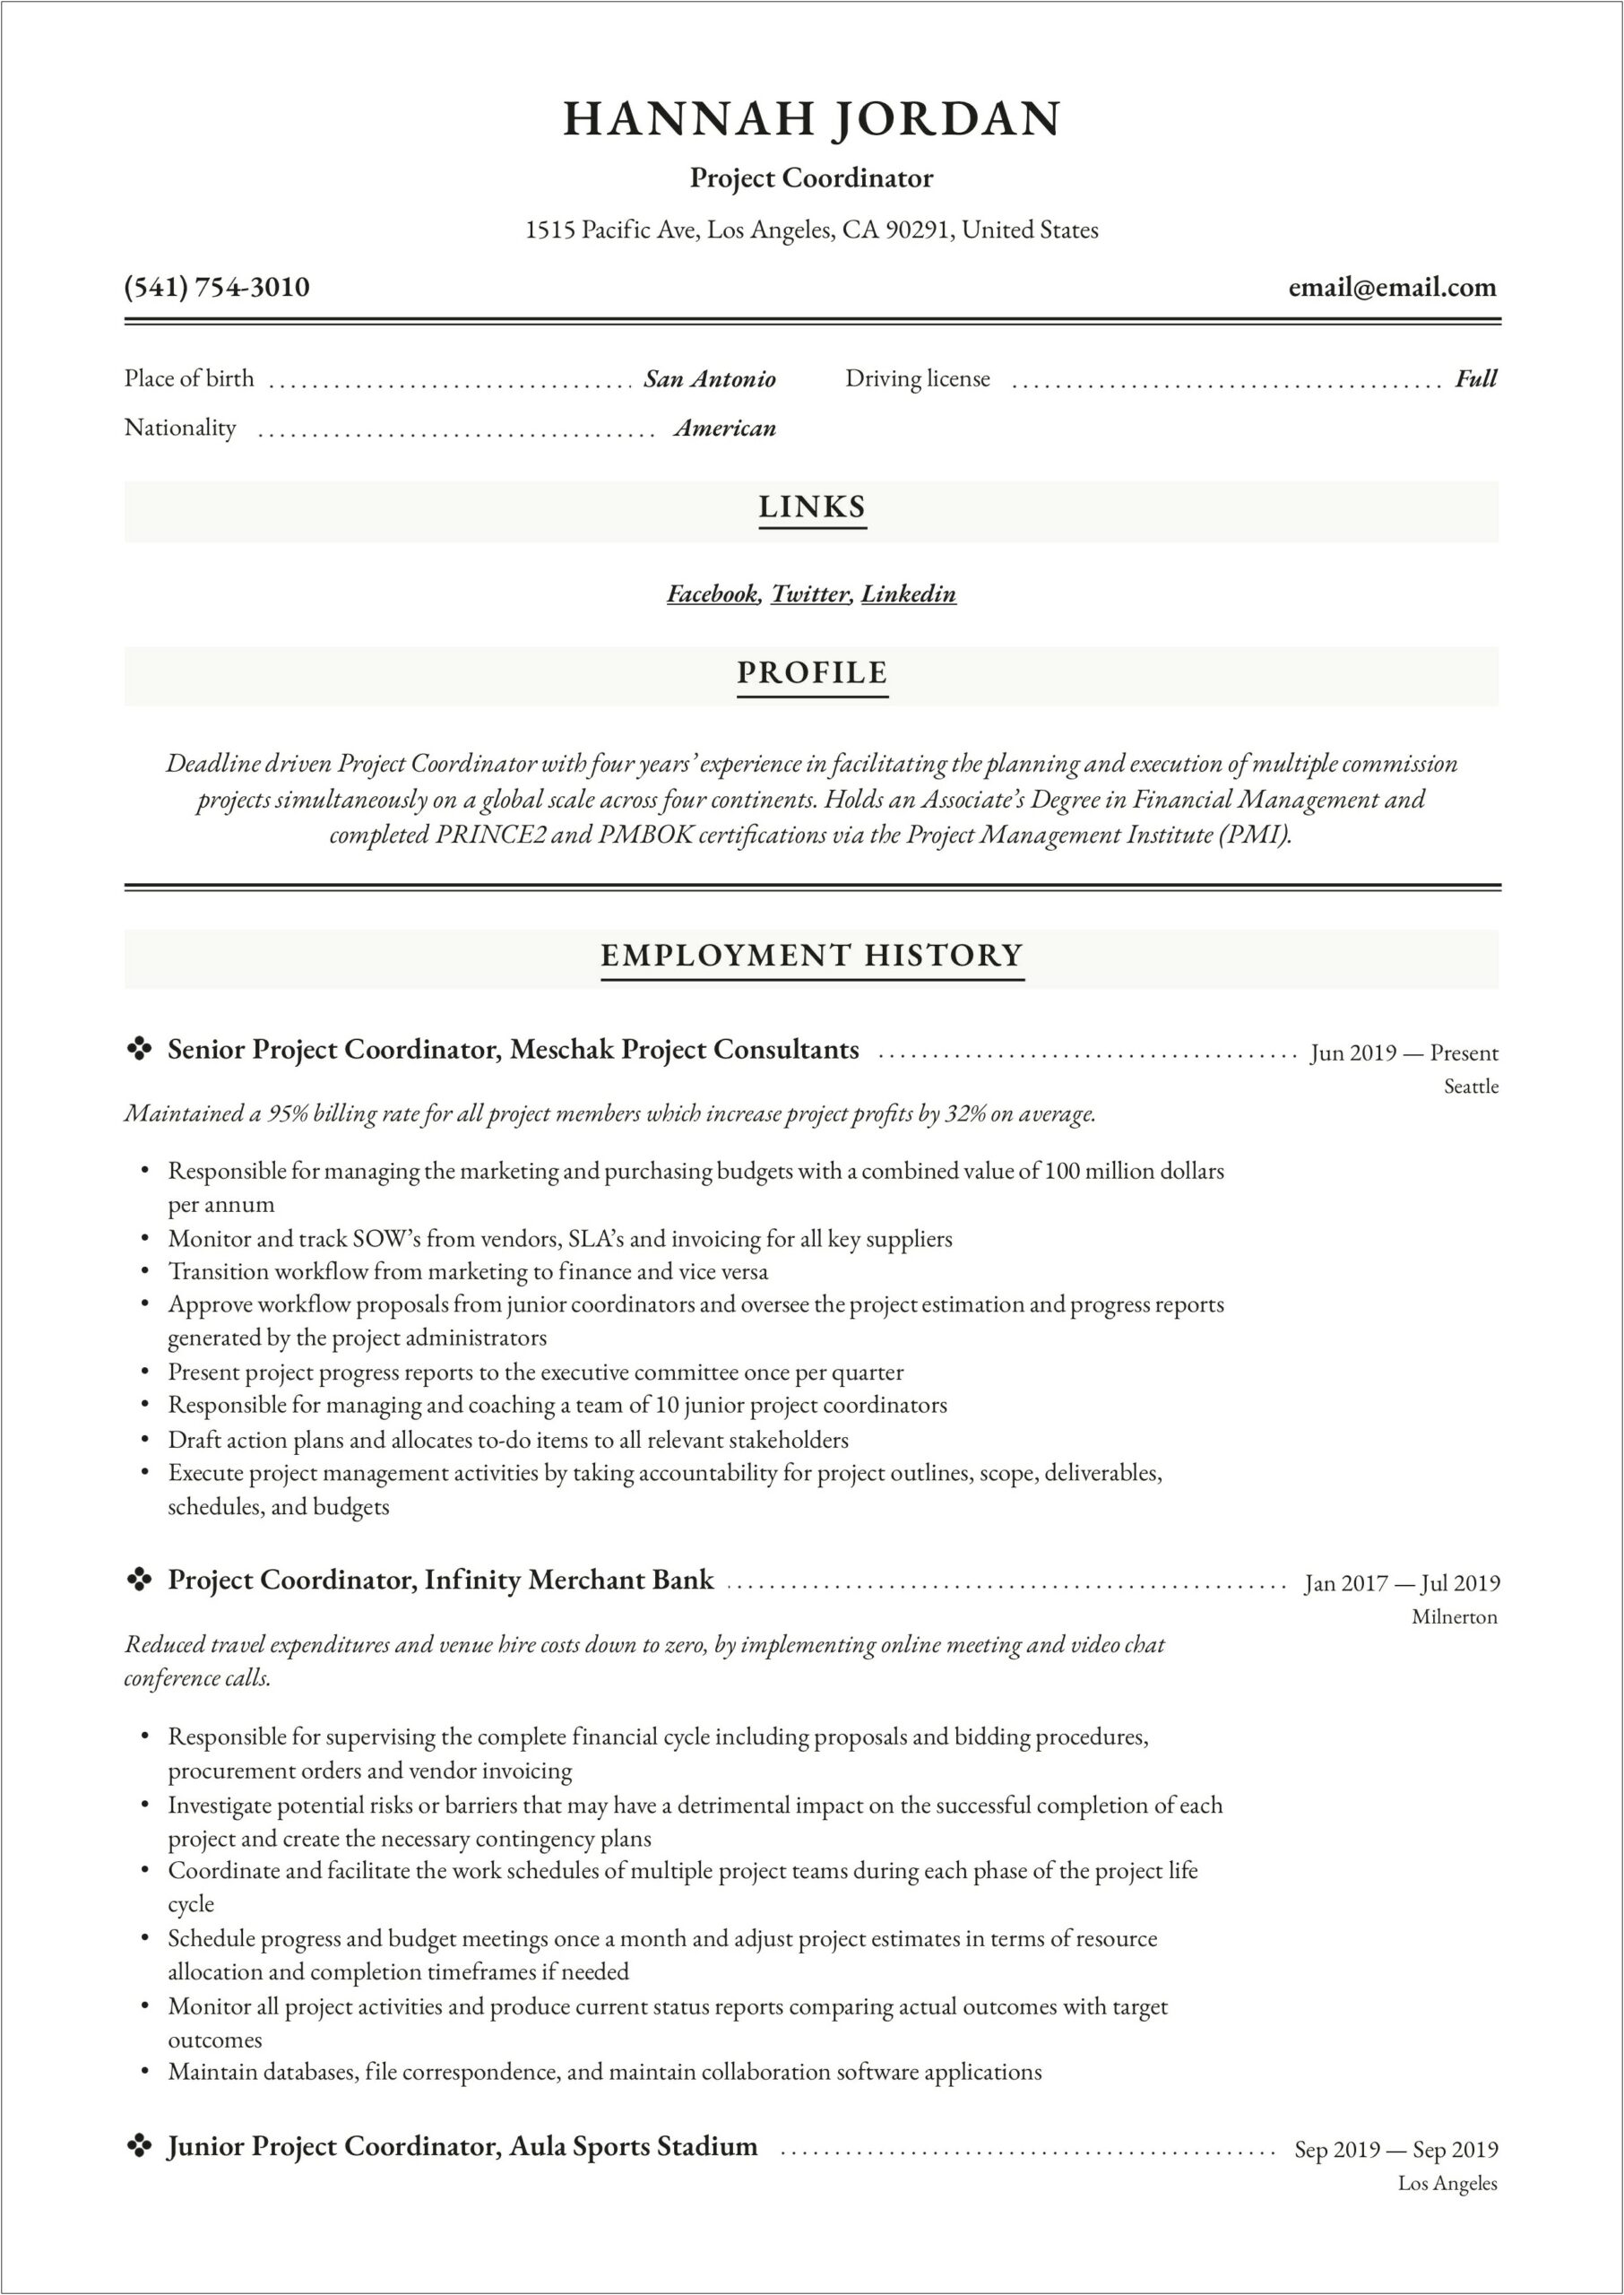 Resume Objective For Aspiring Project Manager